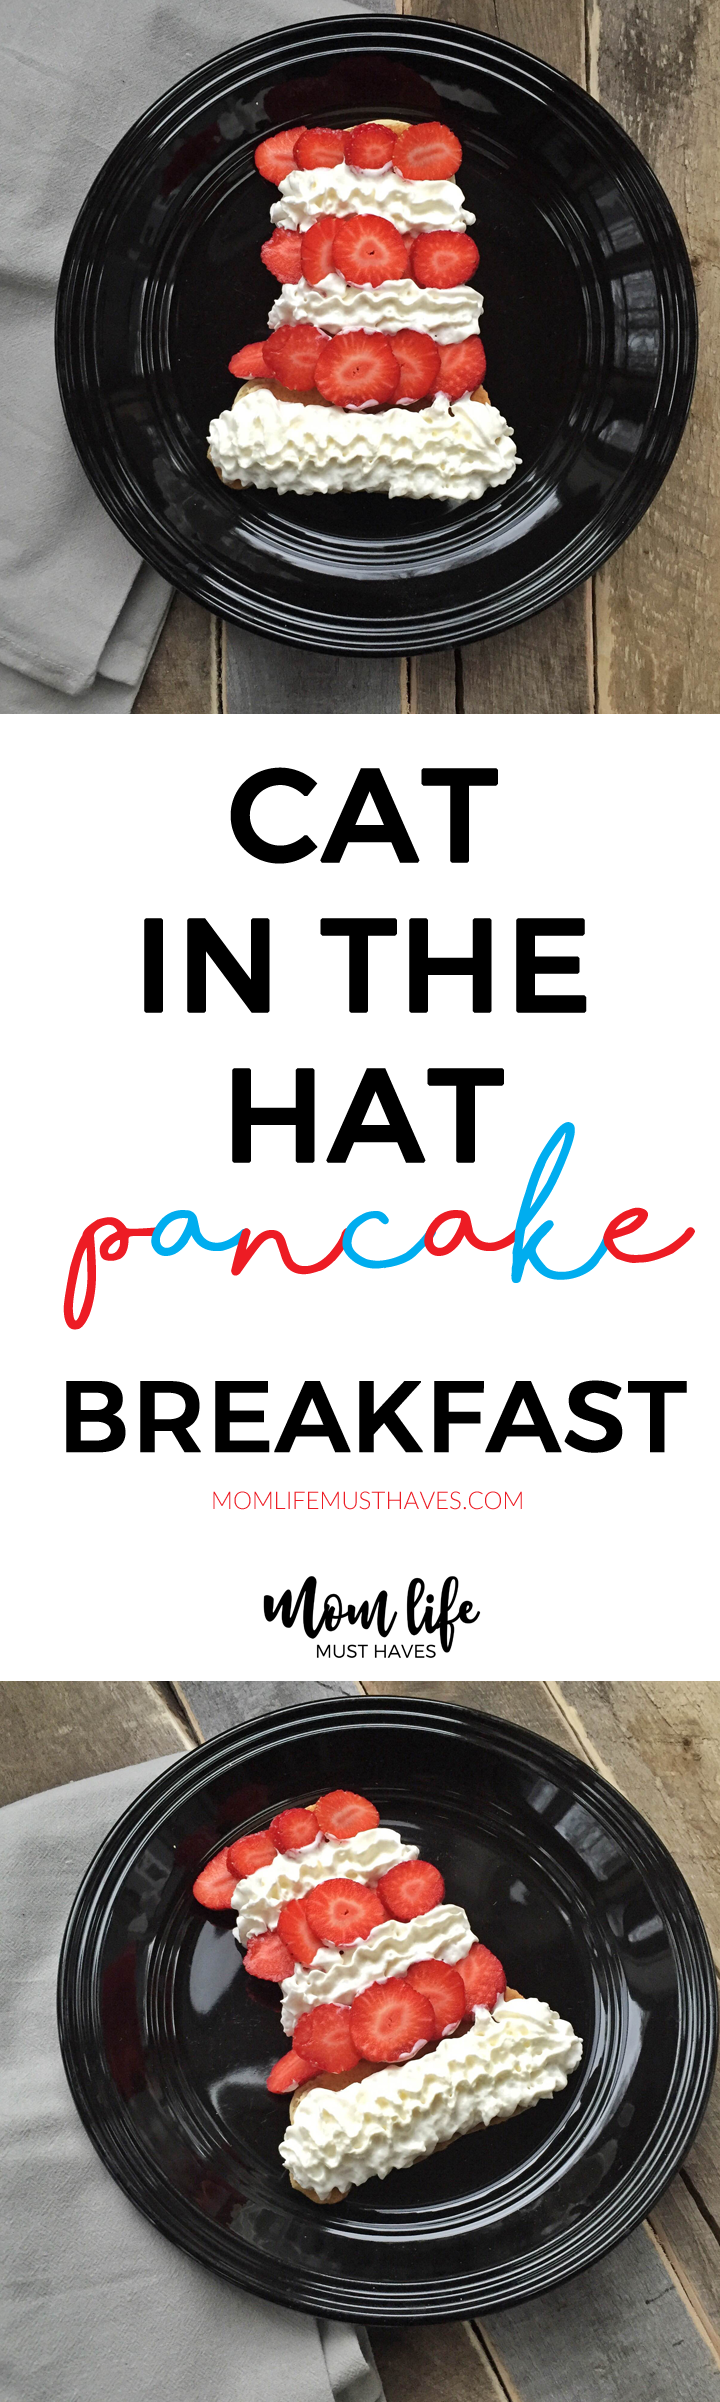 Dr. Seuss cat in the hat pancakes @ momlifemusthaves.com